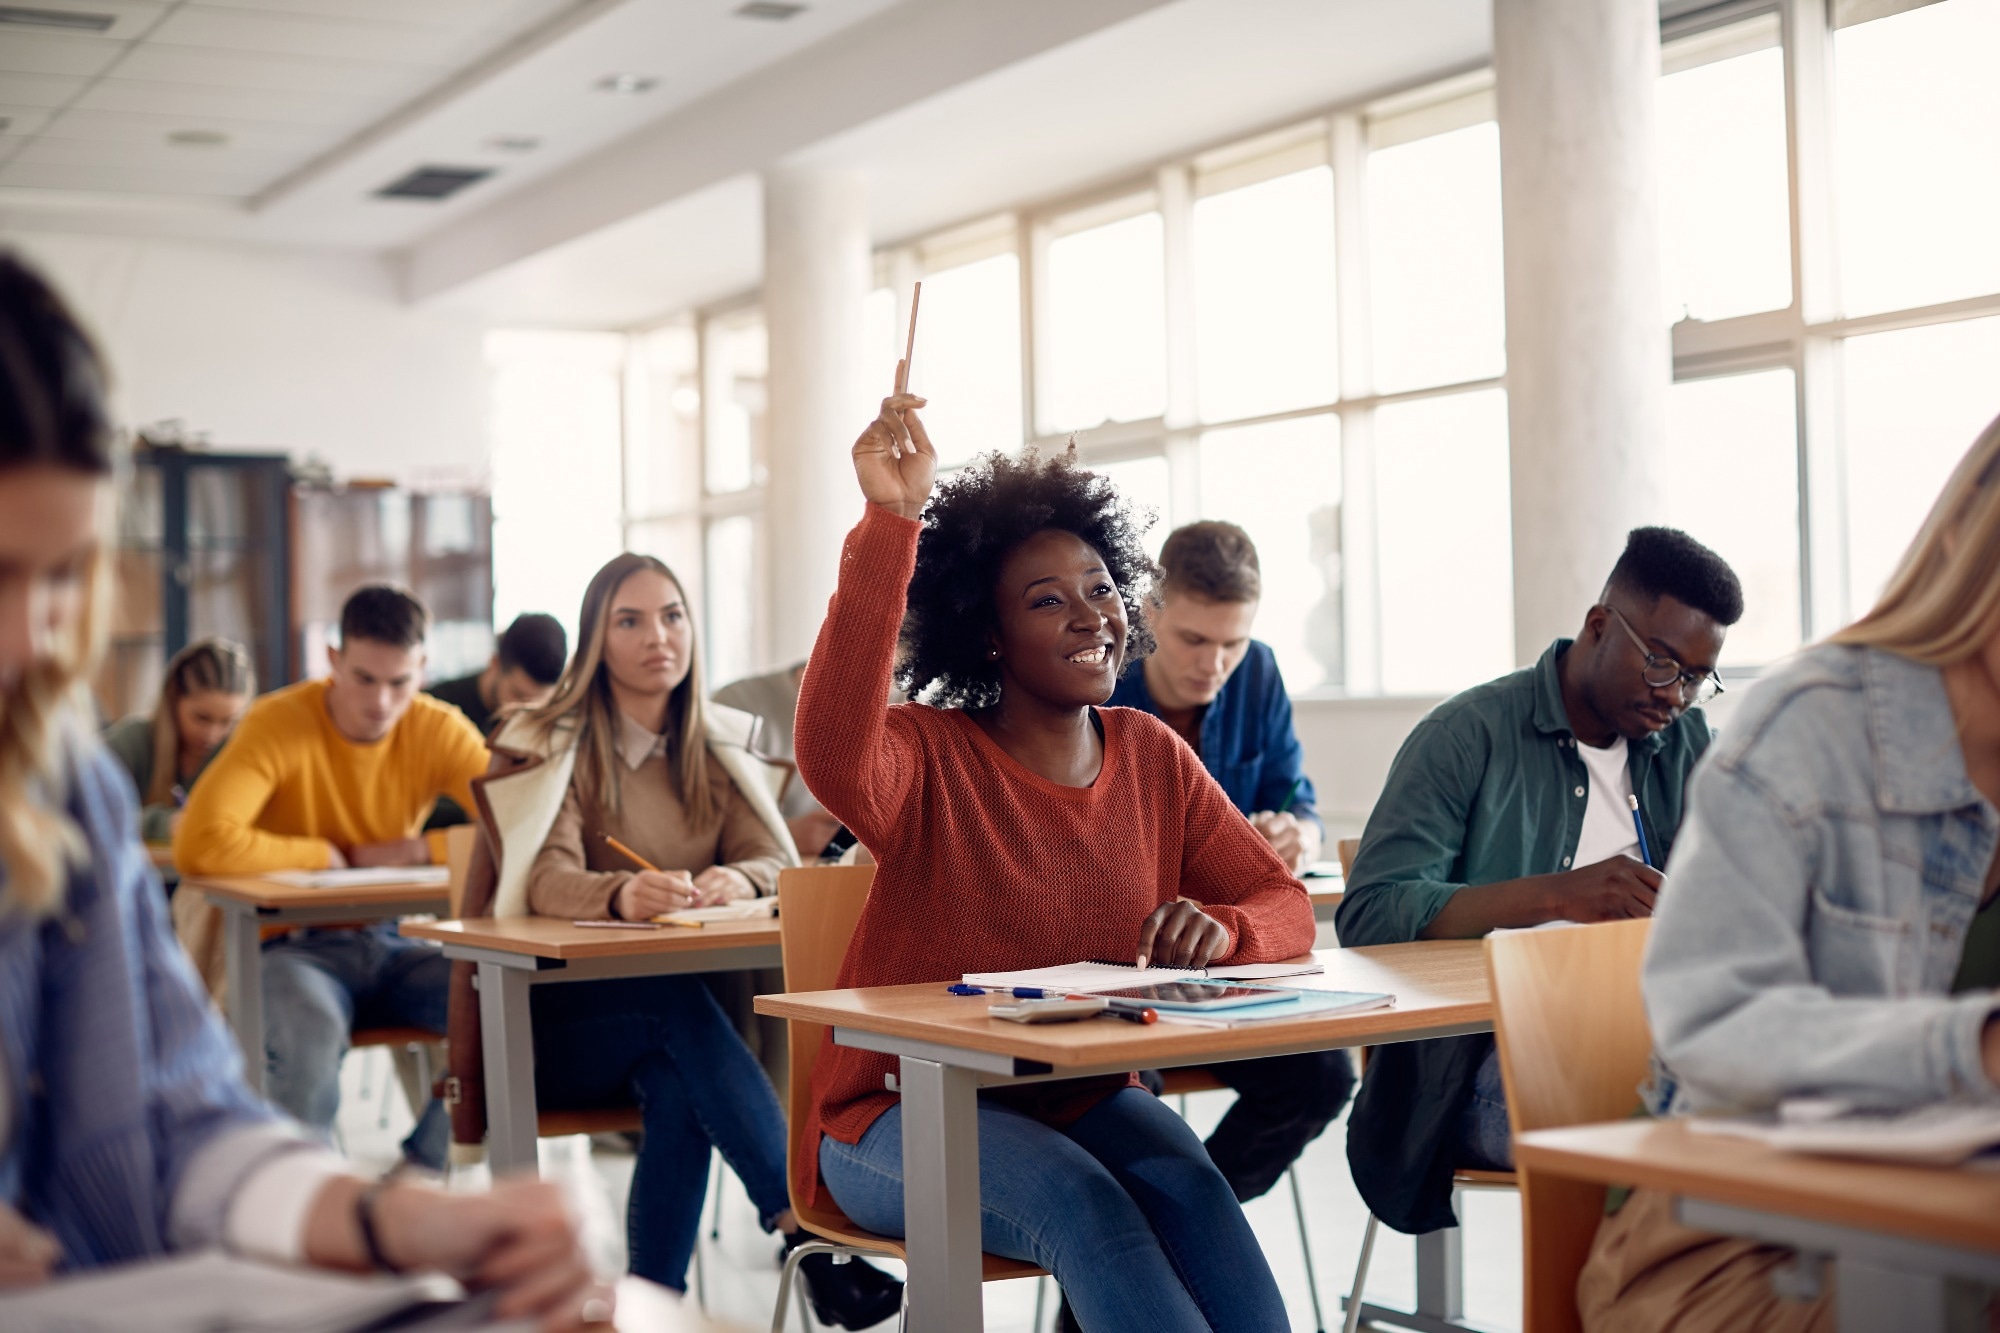 Study: Effects of education on adult mortality: a global systematic review and meta-analysis. Image Credit: Drazen Zigic/Shutterstock.com